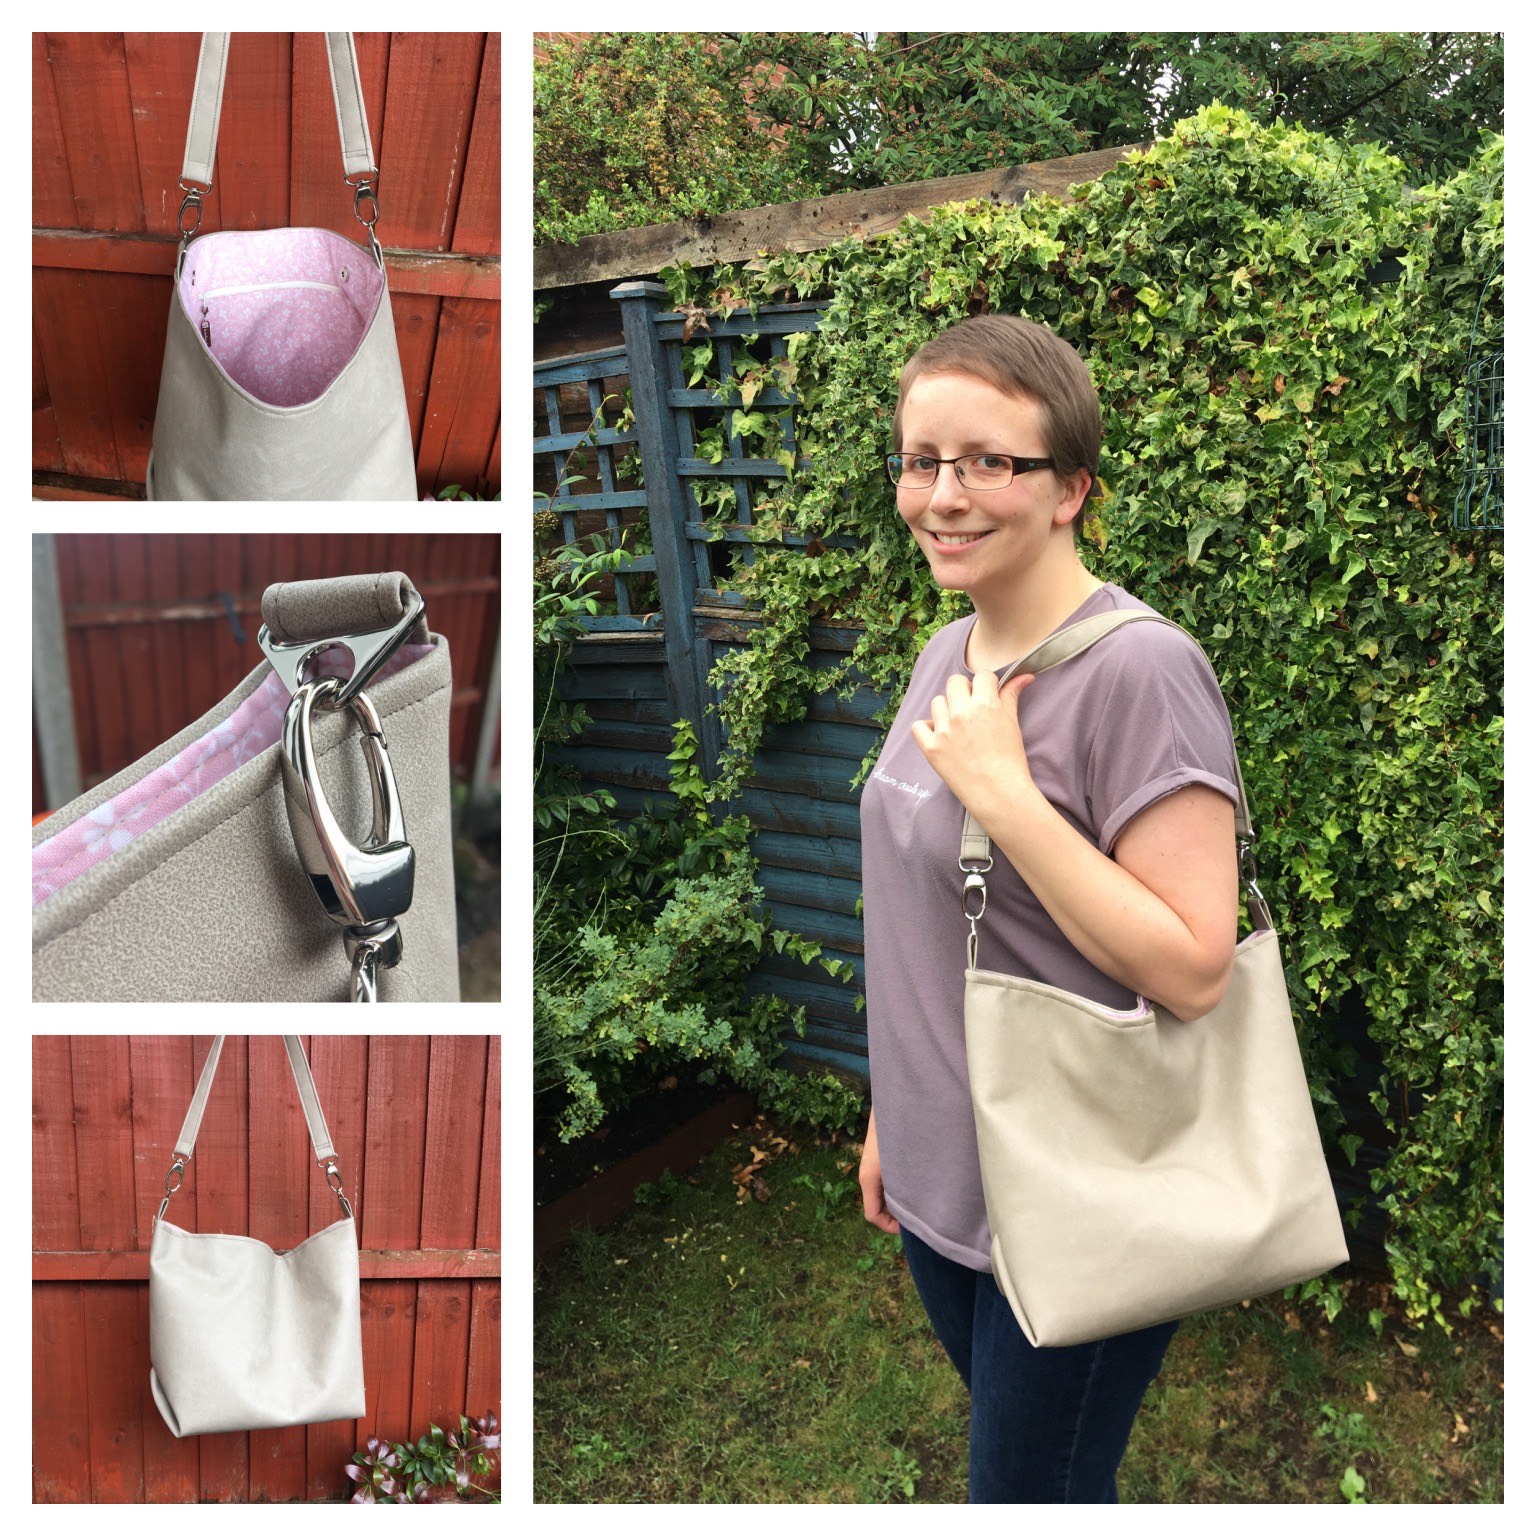 The Cwtsh Bag from Sewing Patterns by Junyuan 
, made by Evey Hay